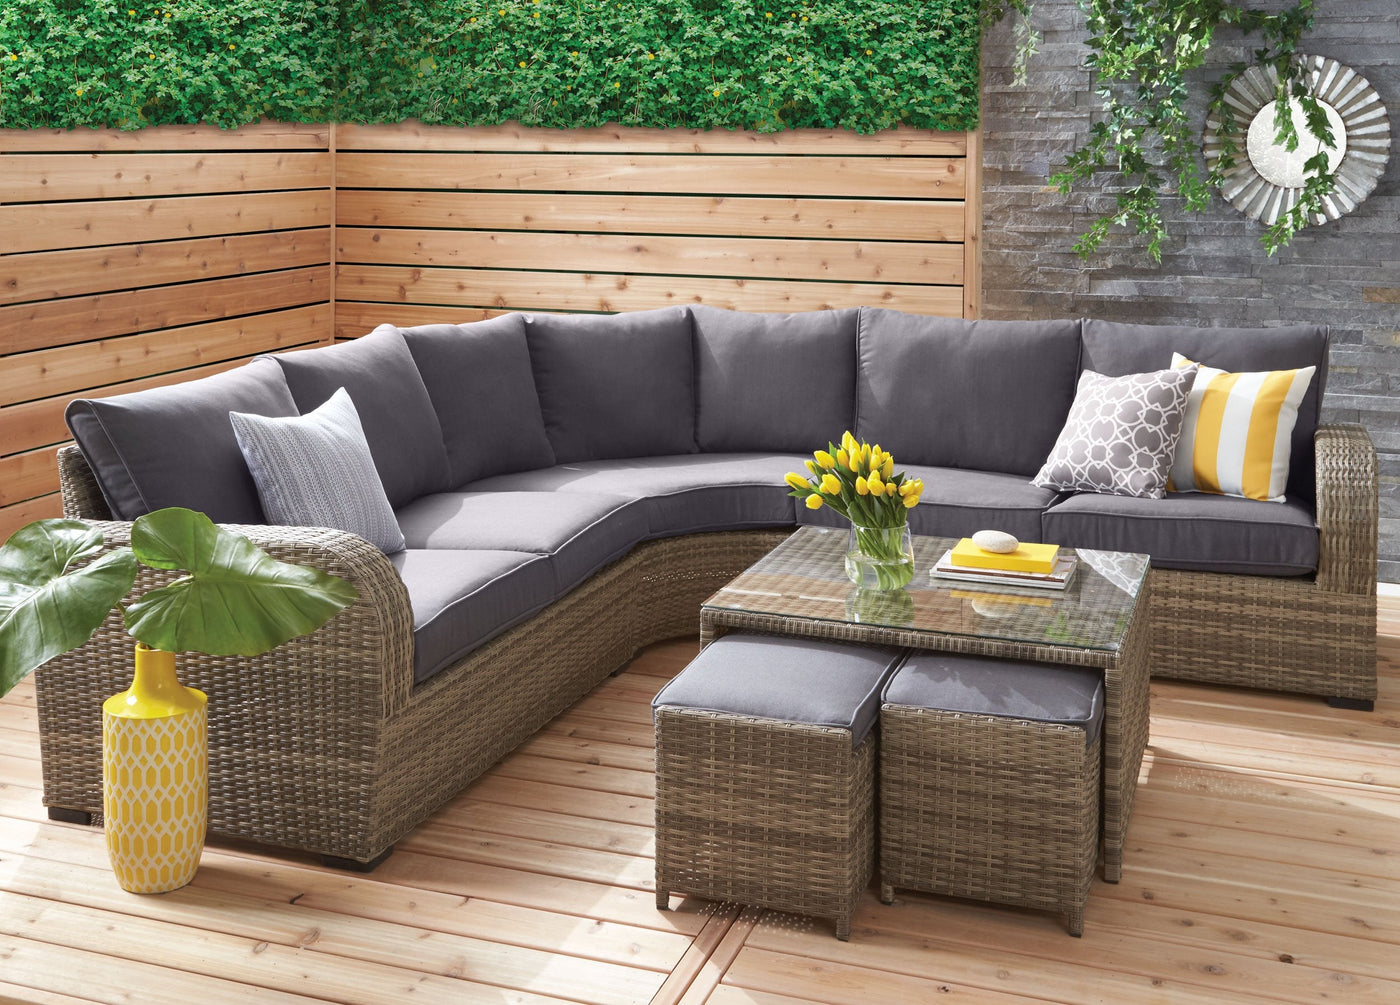 Melville One- 3-Piece Outdoor Sectional - Grey